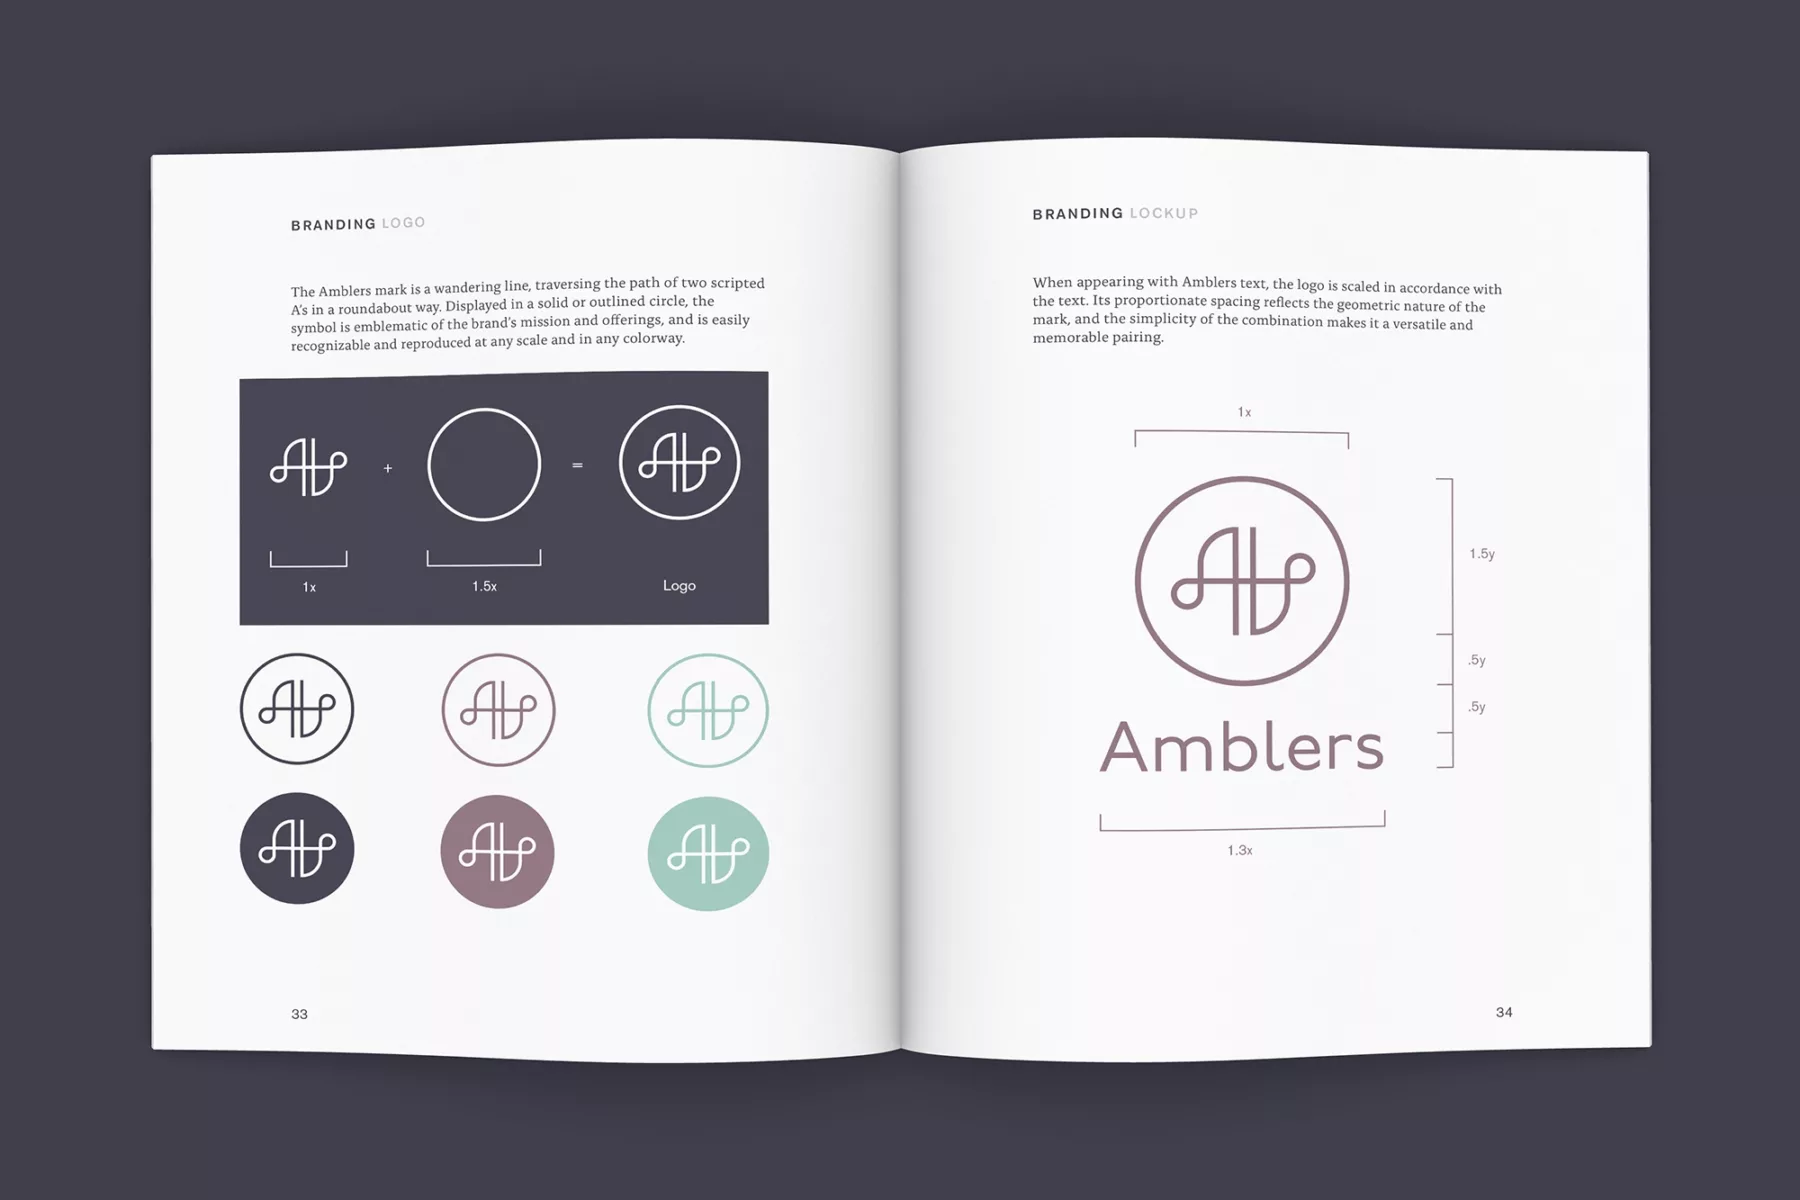 Book spread with Amblers branding guidelines (logo).